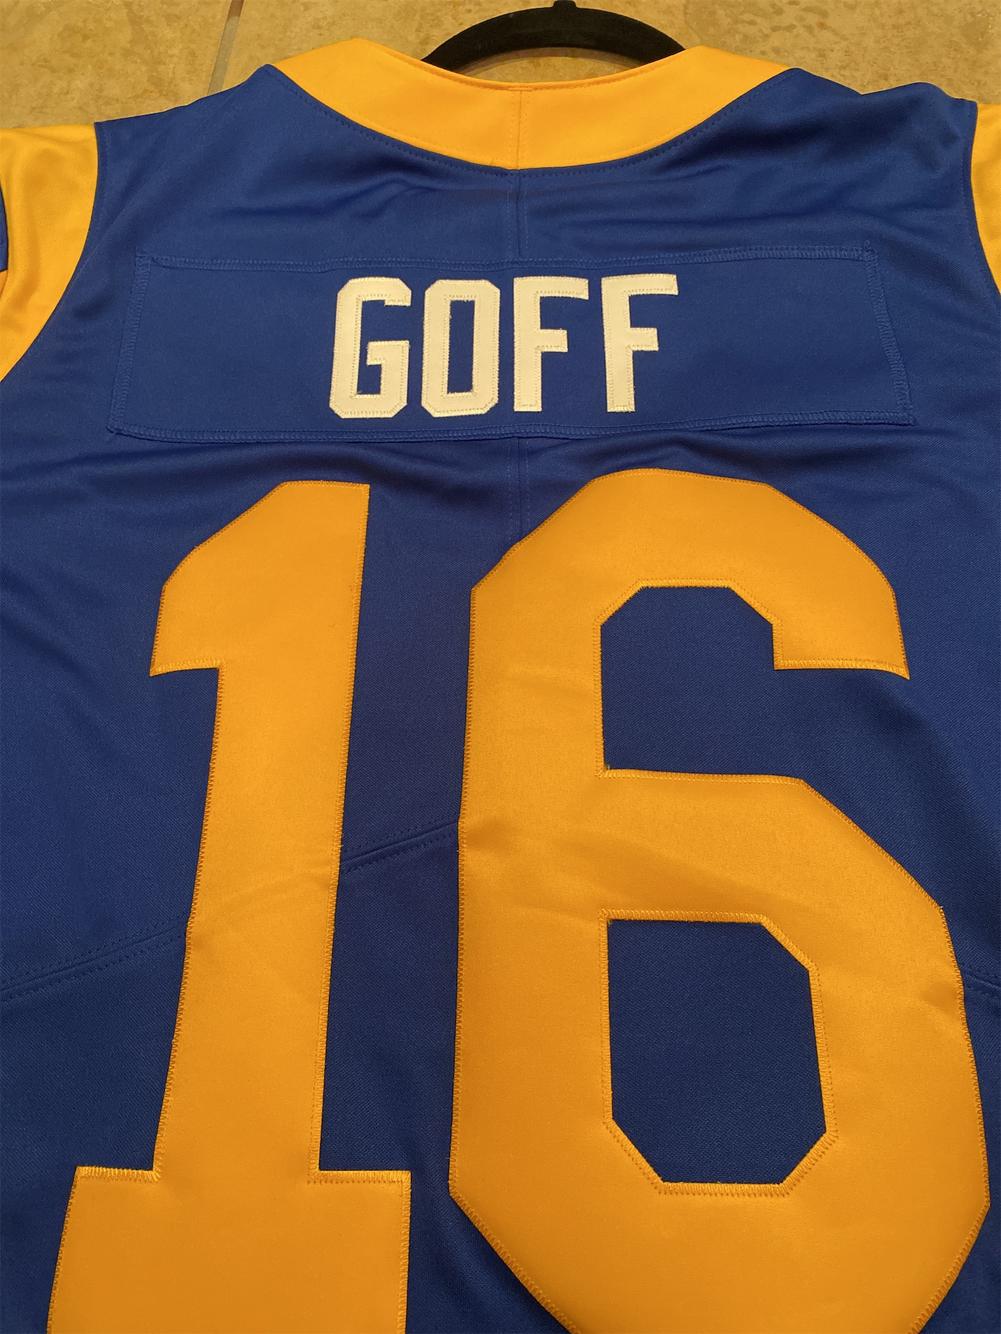 goff rams jersey